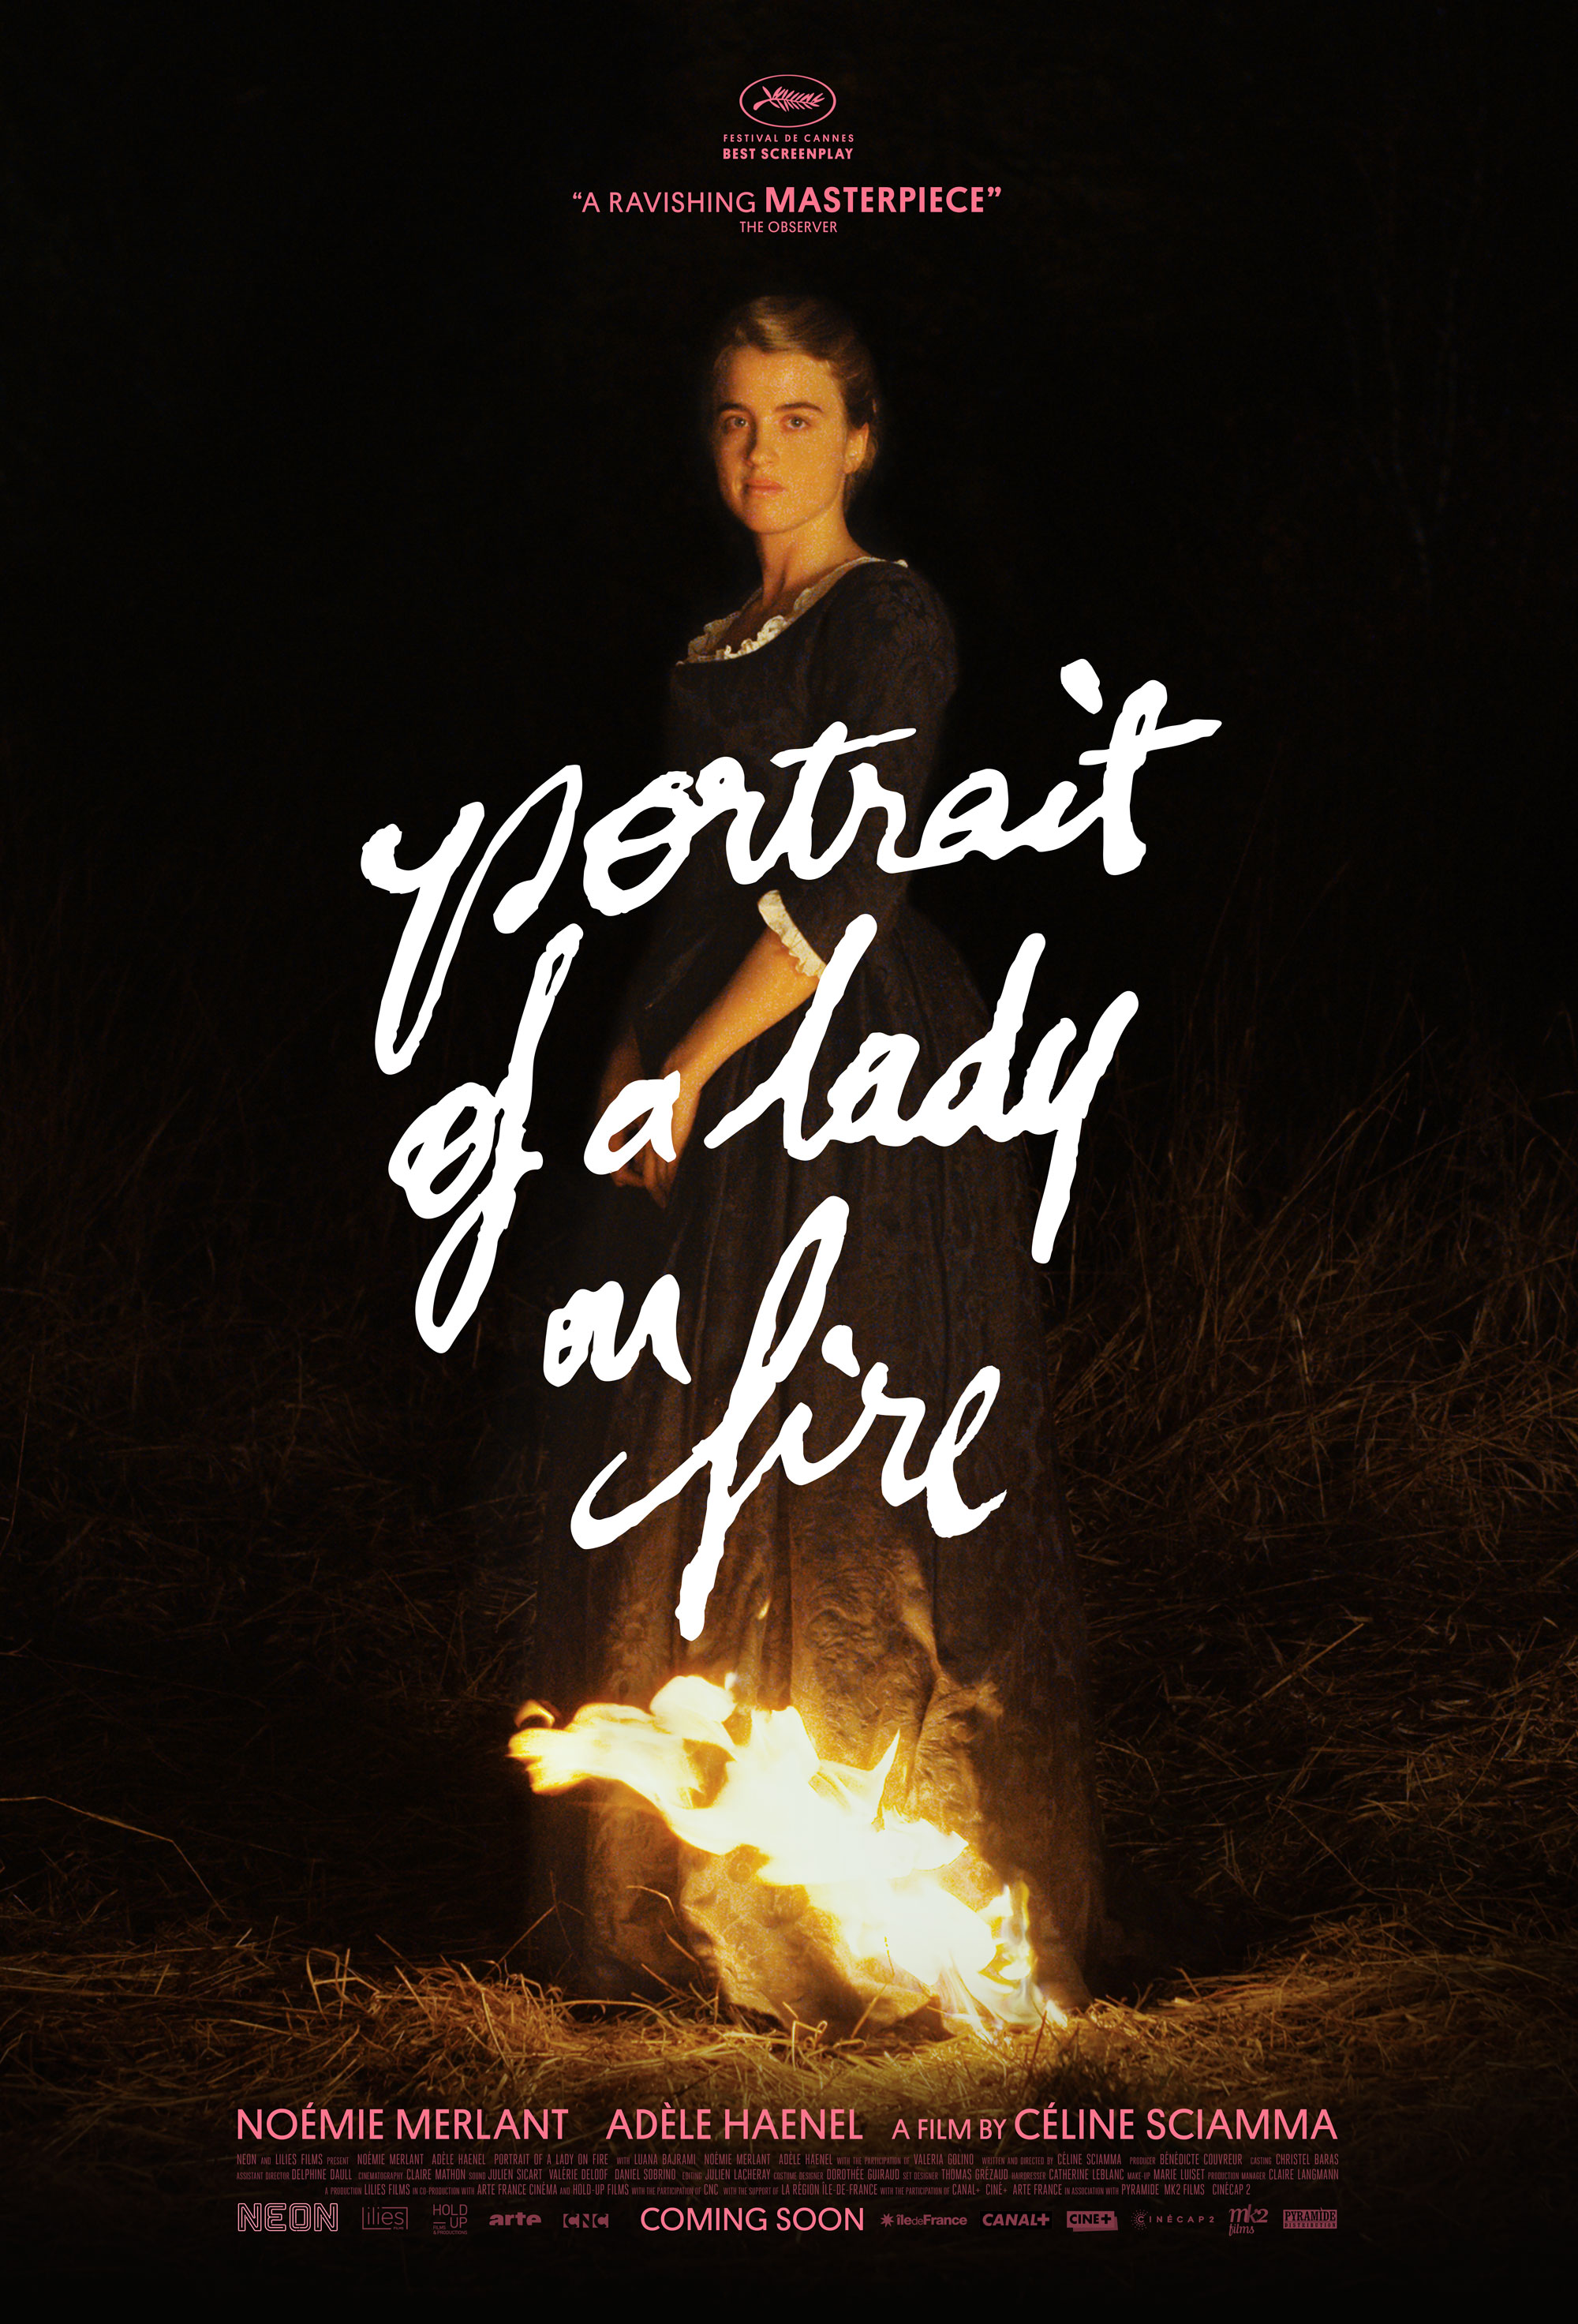 Graphic image of the Portrait of a Lady on Fire poster